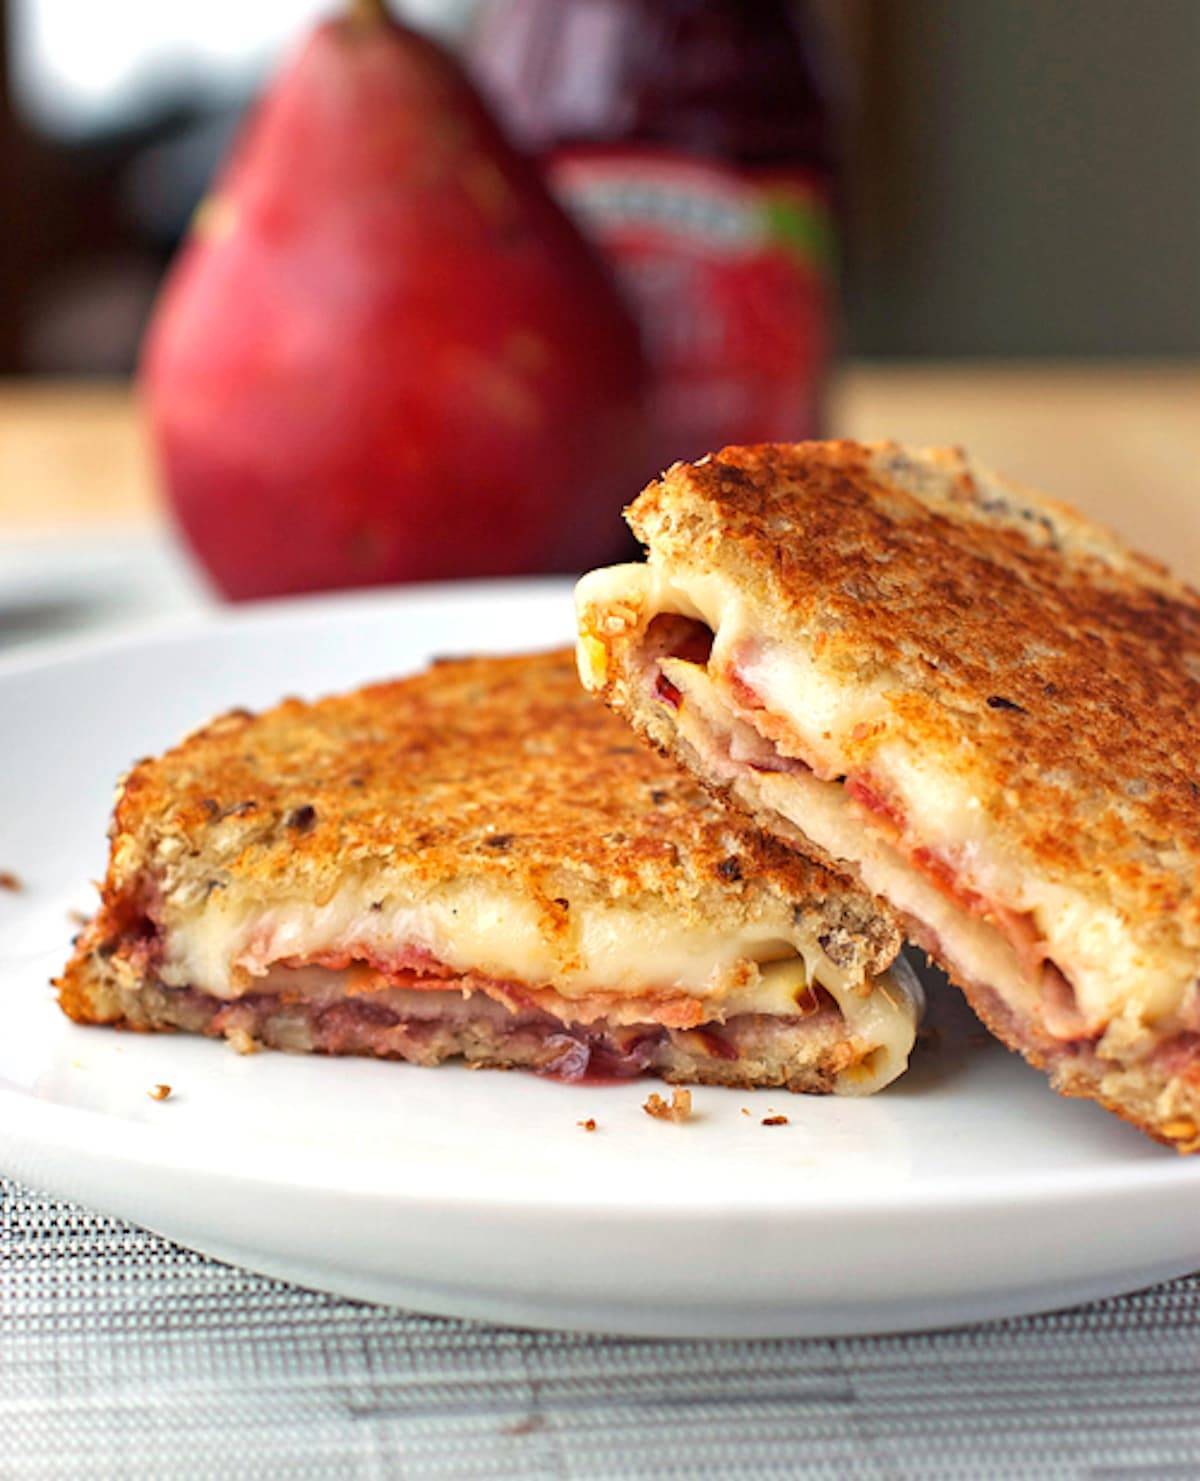 Grilled cheese sandwich stuffed with bacon, pear slices, and raspberry preserves.